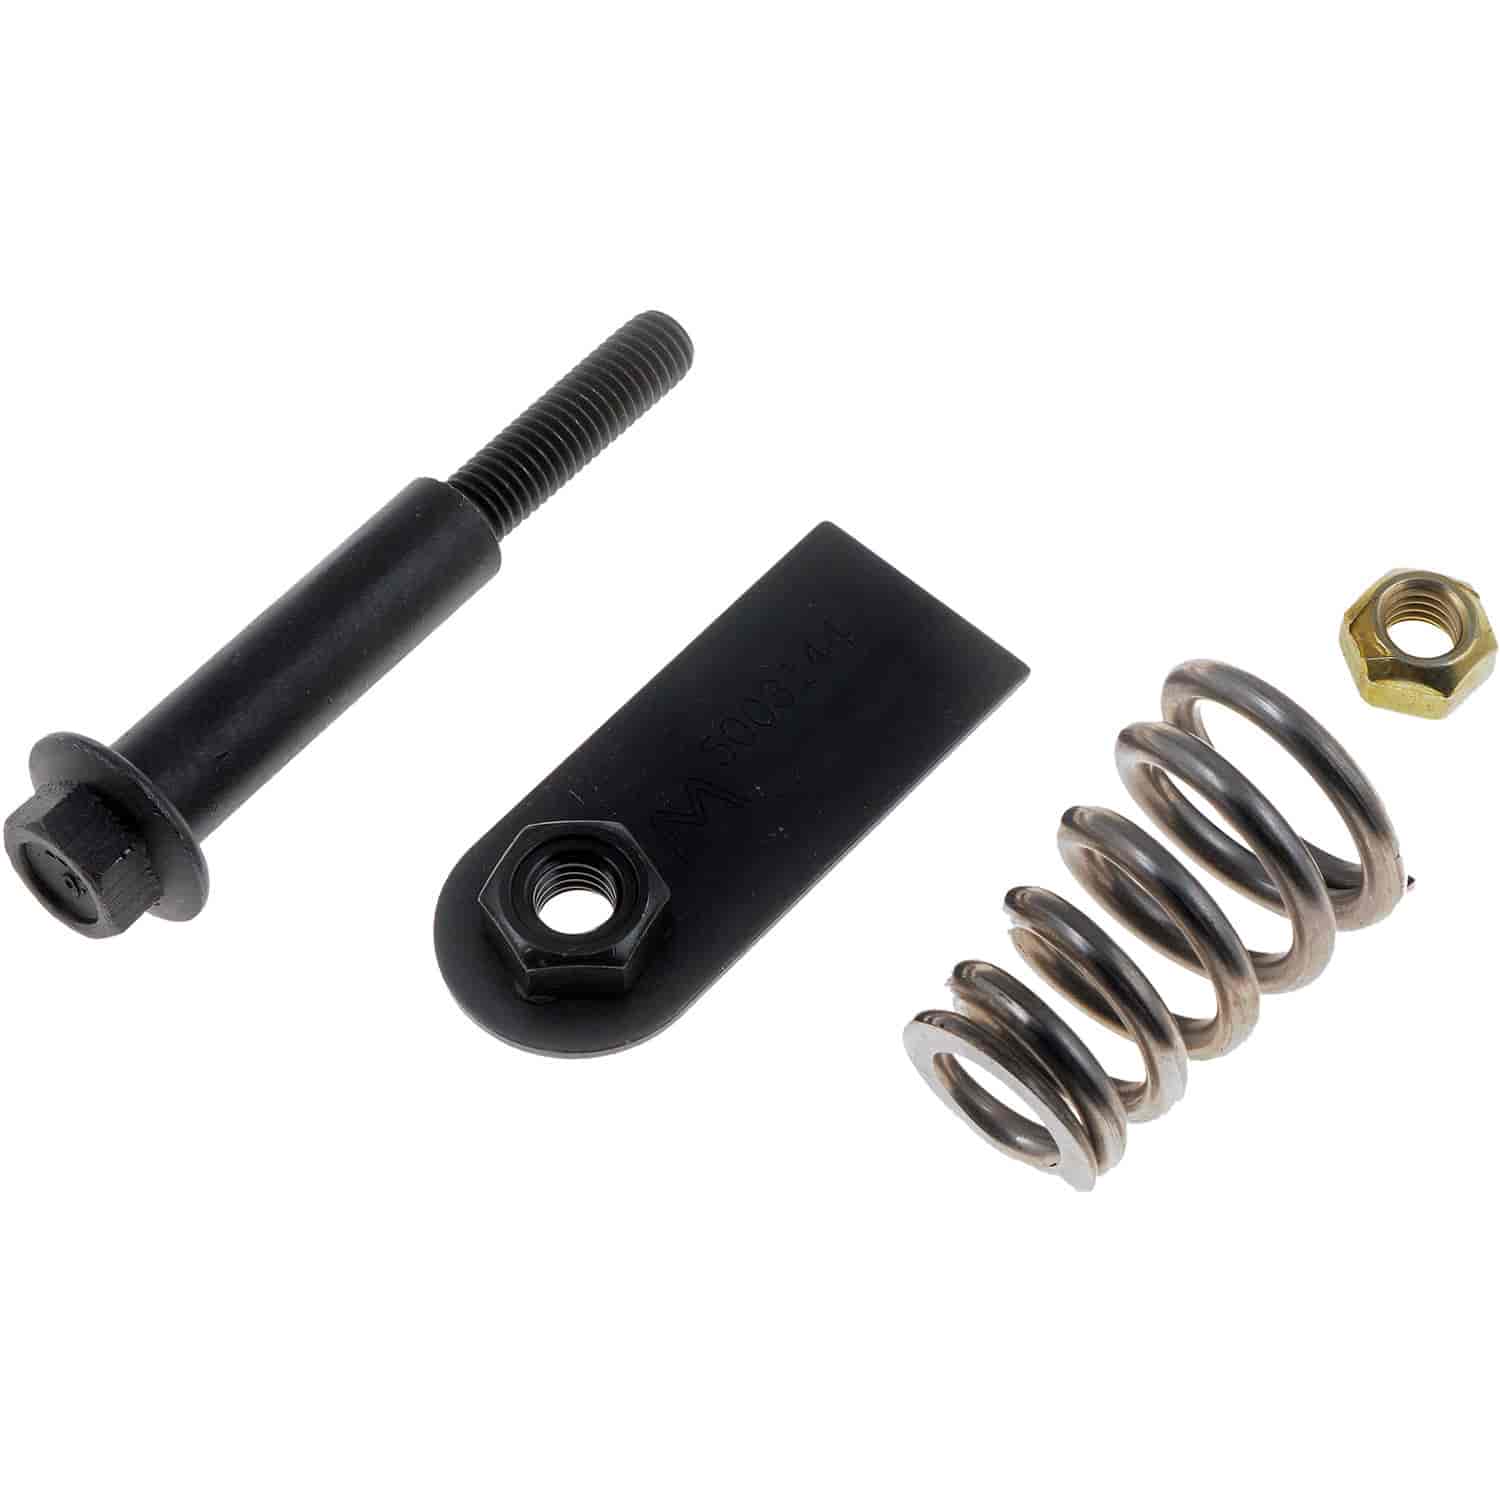 Manifold Bolt and Spring Kit - M8-1.25 x